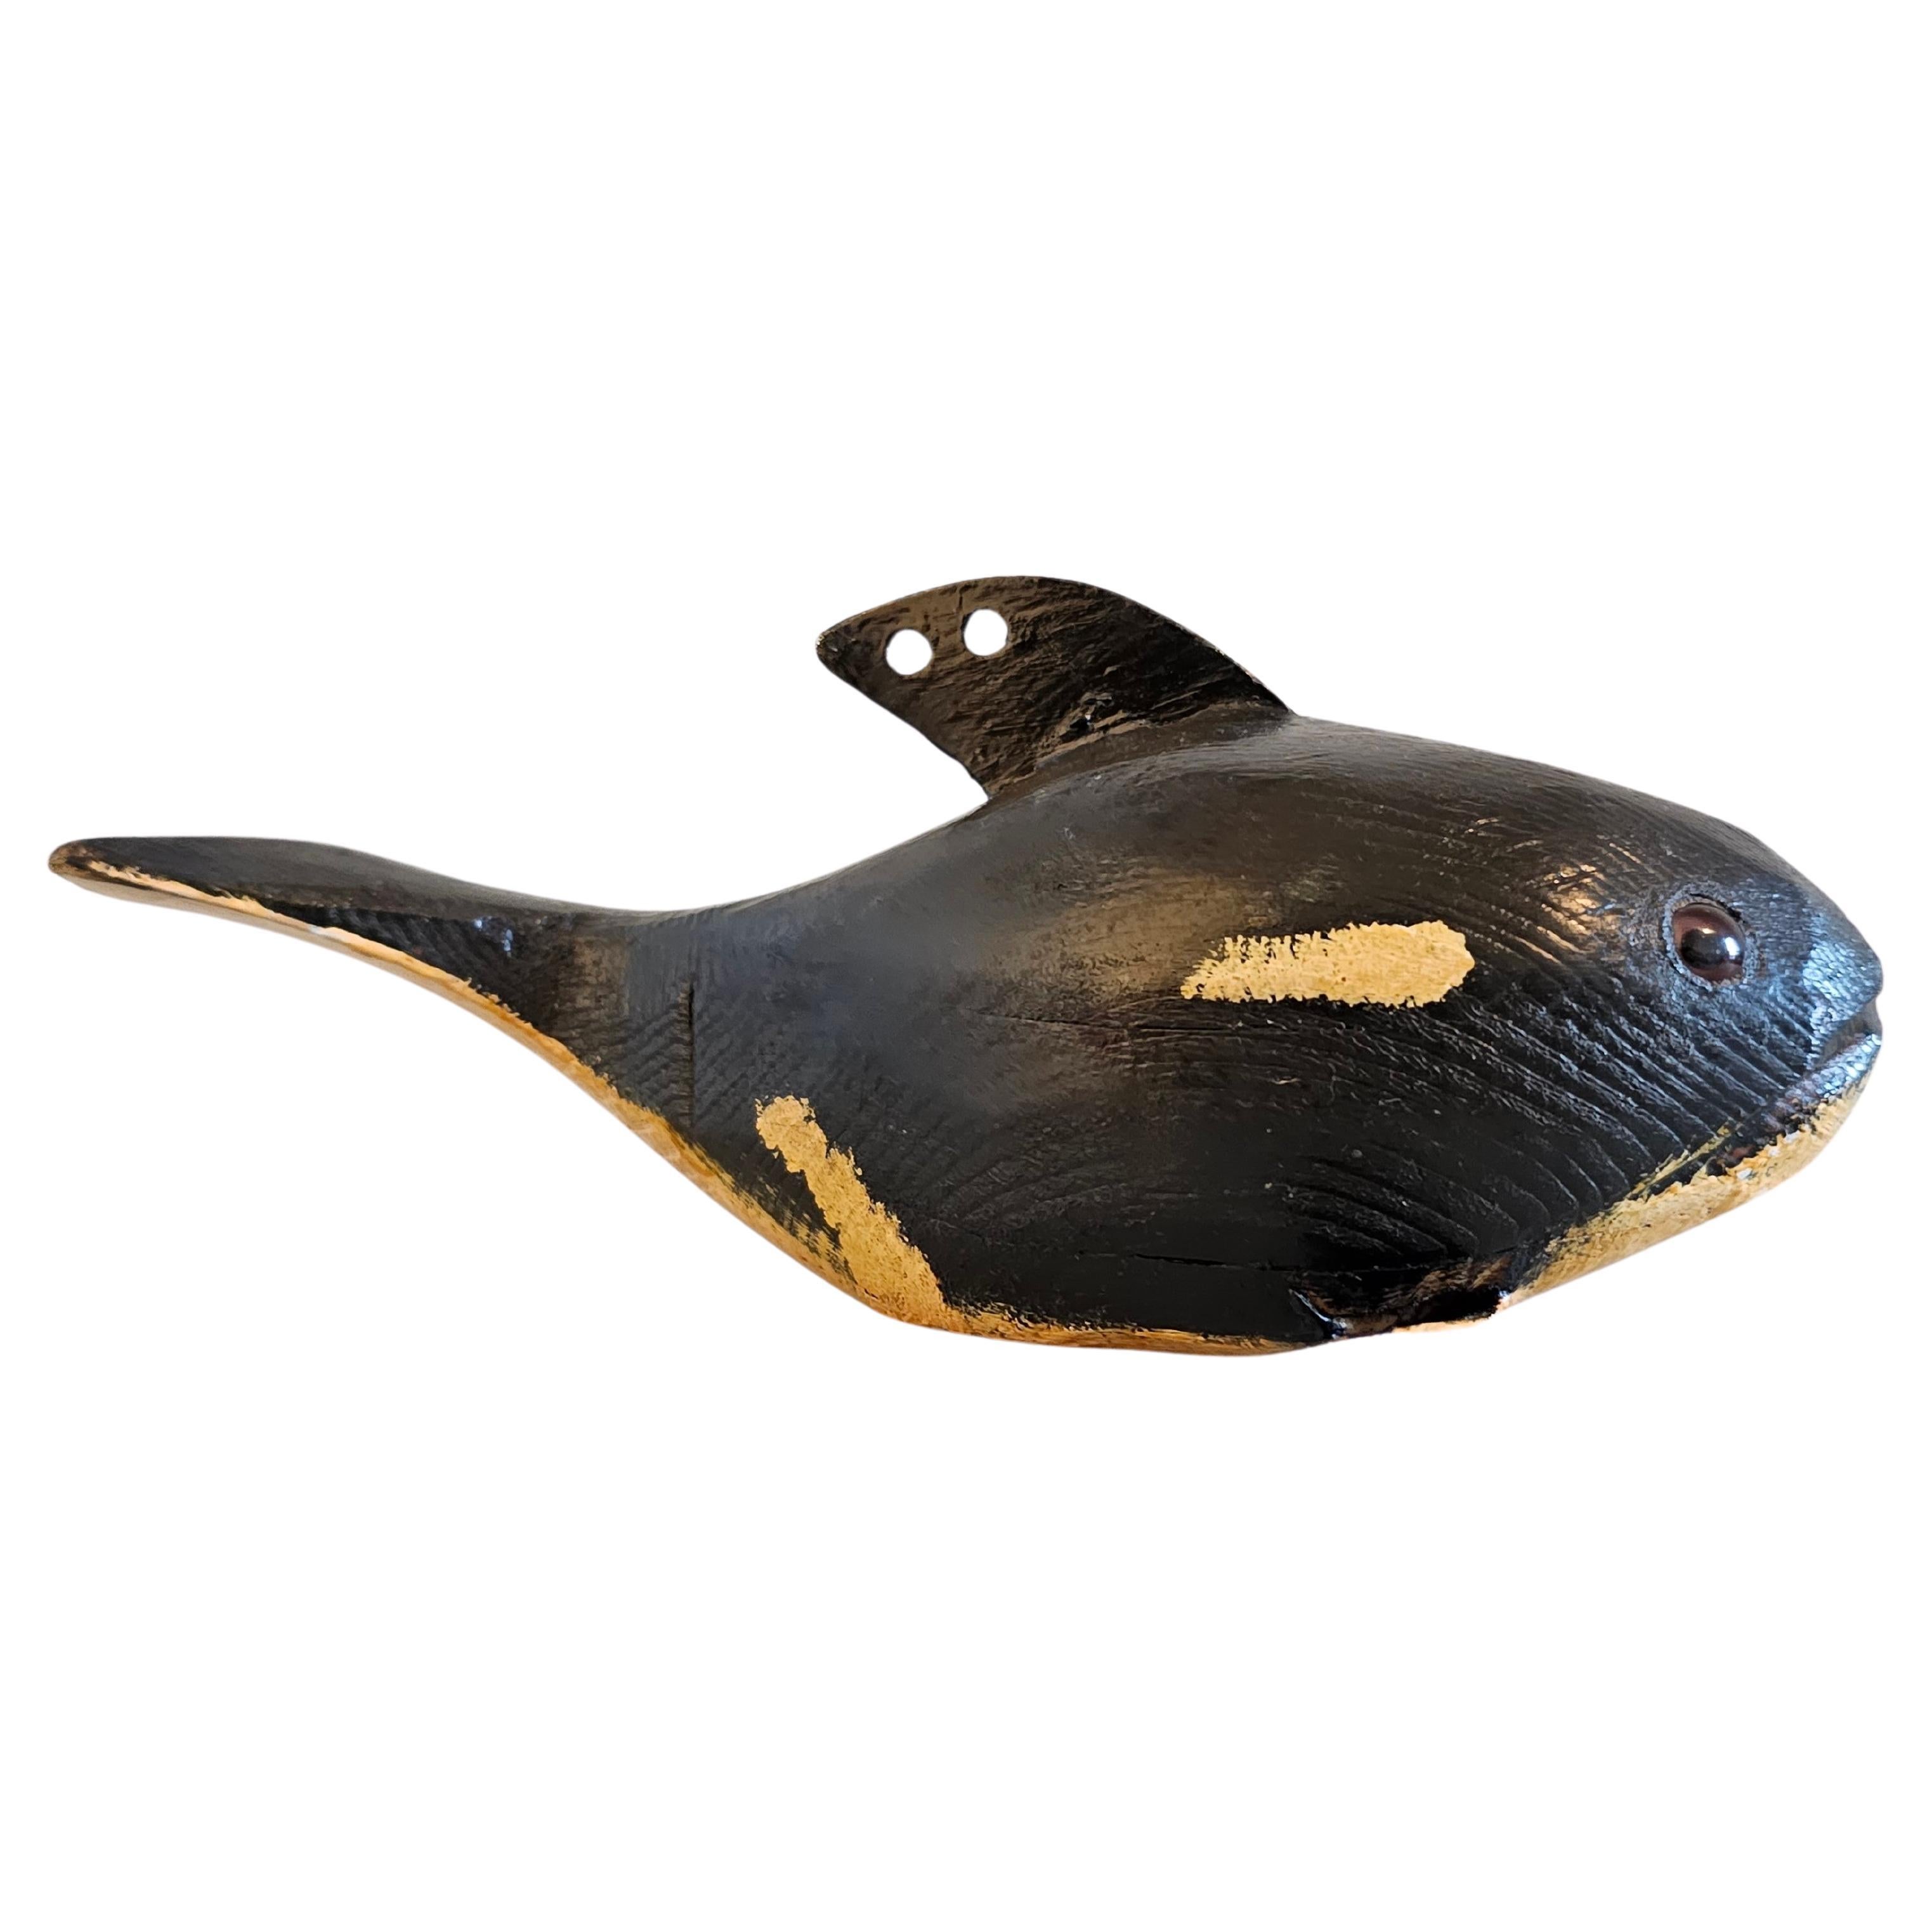 Duluth Fish Decoy American Folk Art Carved Painted Orca Killer Whale Sculpture For Sale